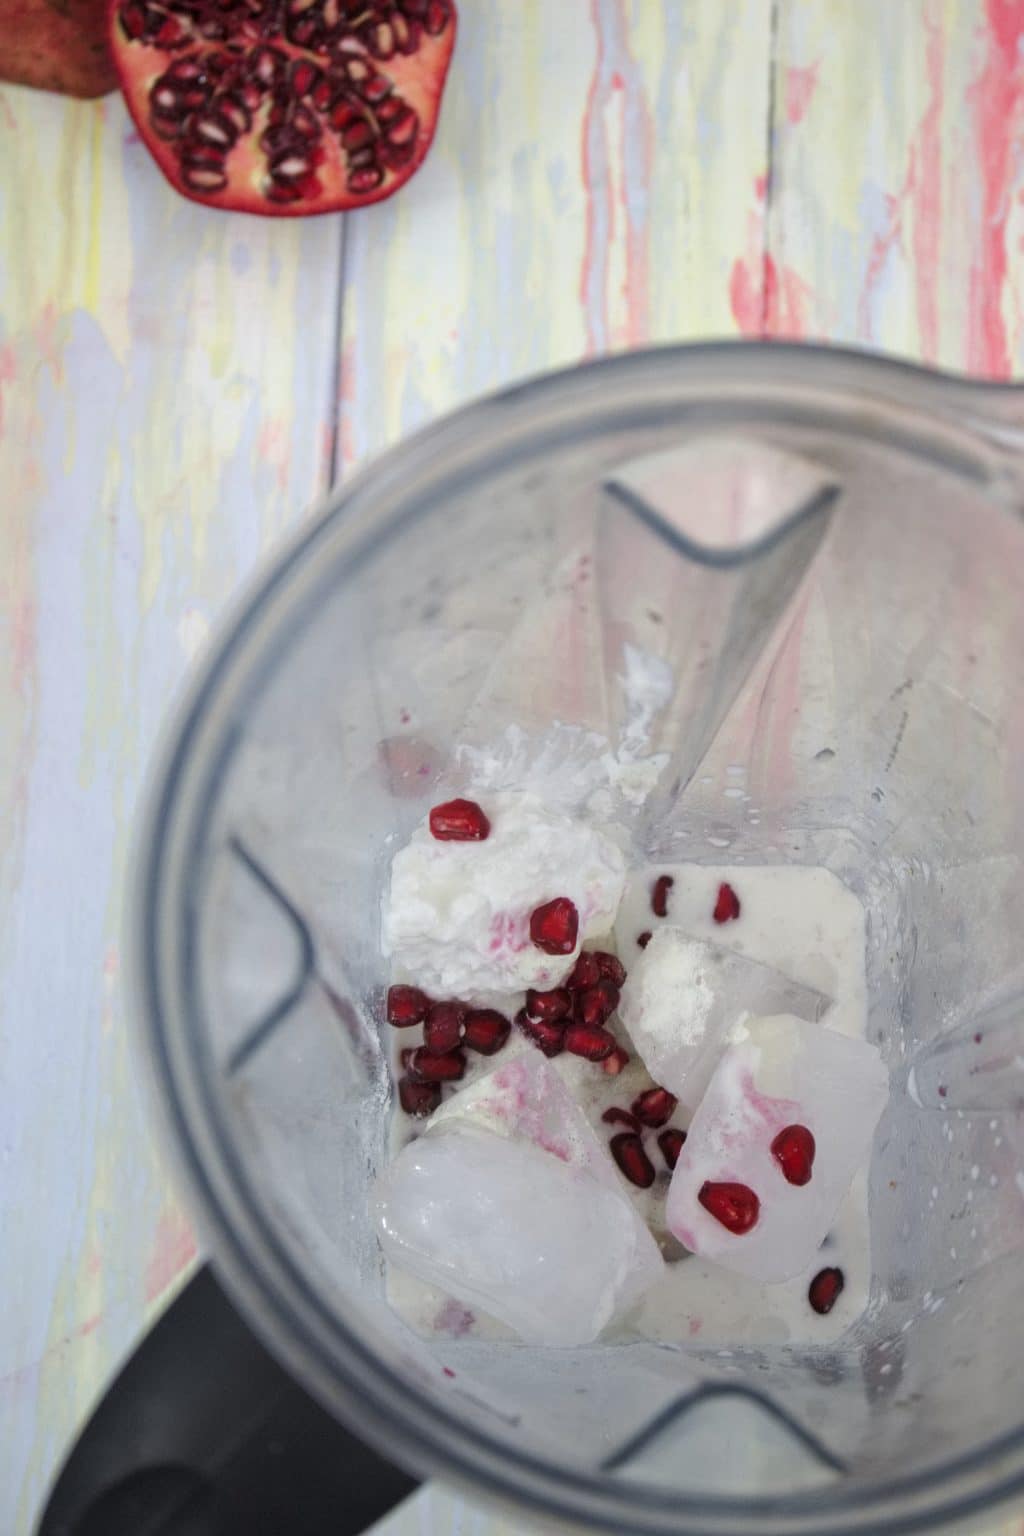 Blender with ice, pomegranate arils and collagen powder